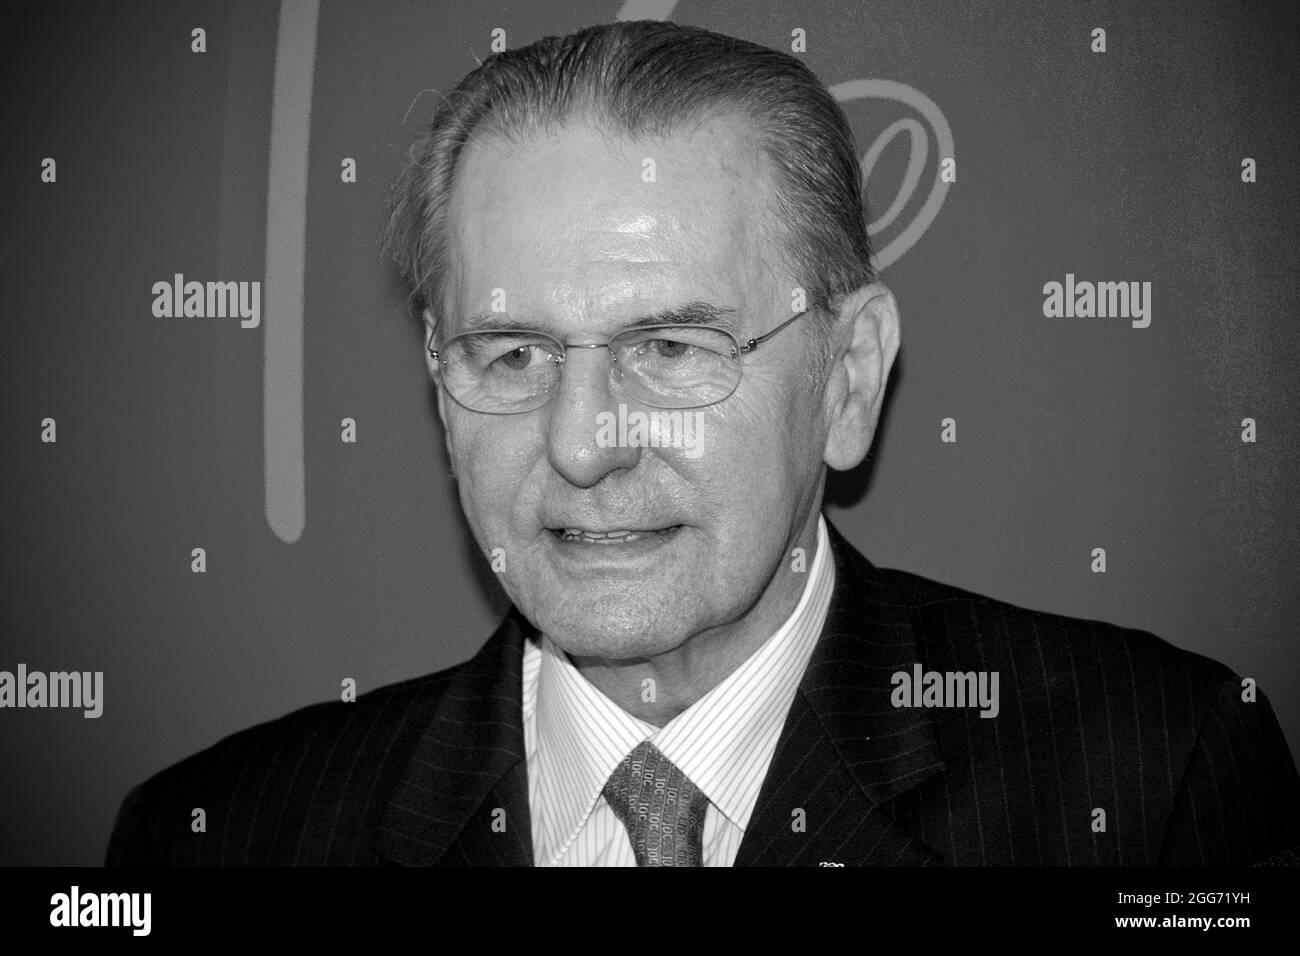 Tauberbischofsheim, Deutschland. 29th Aug, 2021. Former IOC President Jacques ROGGE, died at the age of 79. Archive photo; Jacques ROGGE, IOC Honorary President with his wife Anne, reception in the Tauberbischofsheim town hall in honor of IOC President Dr. Thomas Bach, who celebrated his 60th birthday on December 29th, 2013, January 10th, 2014. å Credit: dpa/Alamy Live News Stock Photo